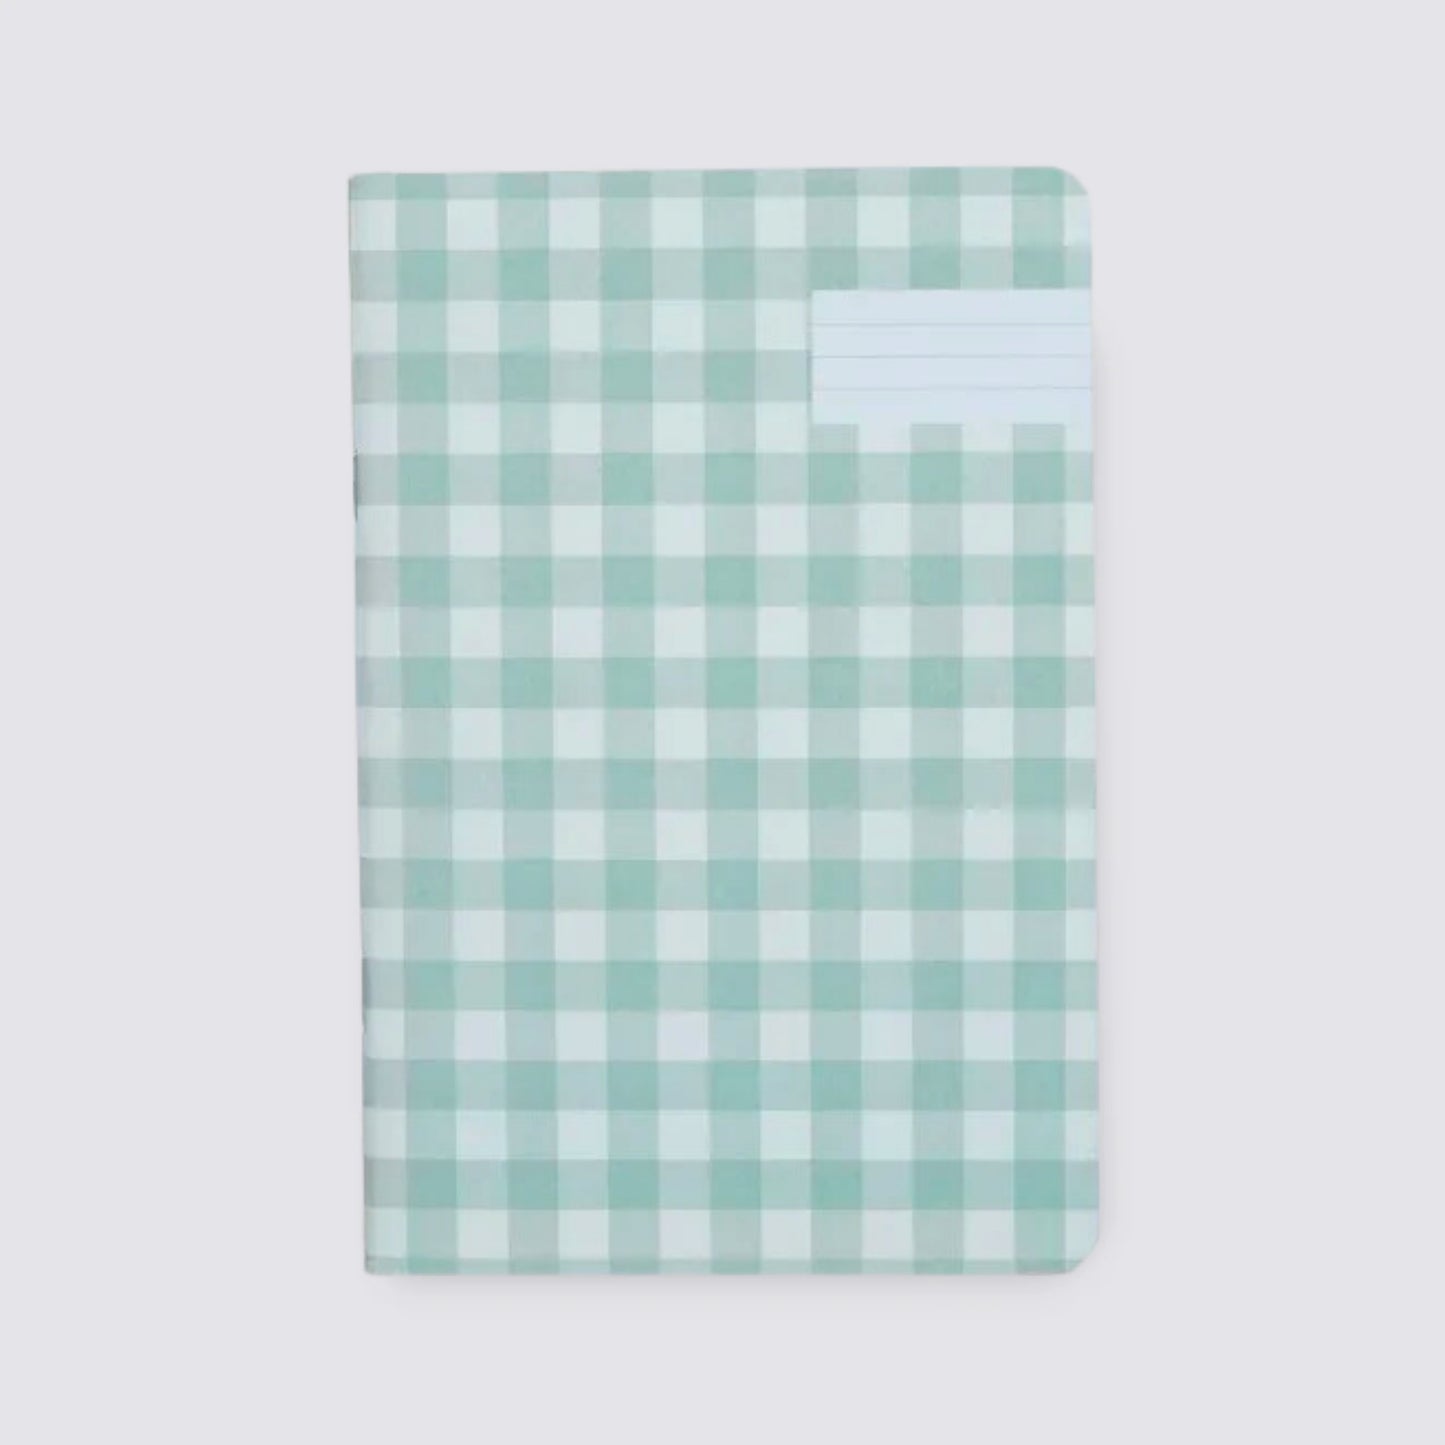 Swinging Spring Green Notebook - Ruled